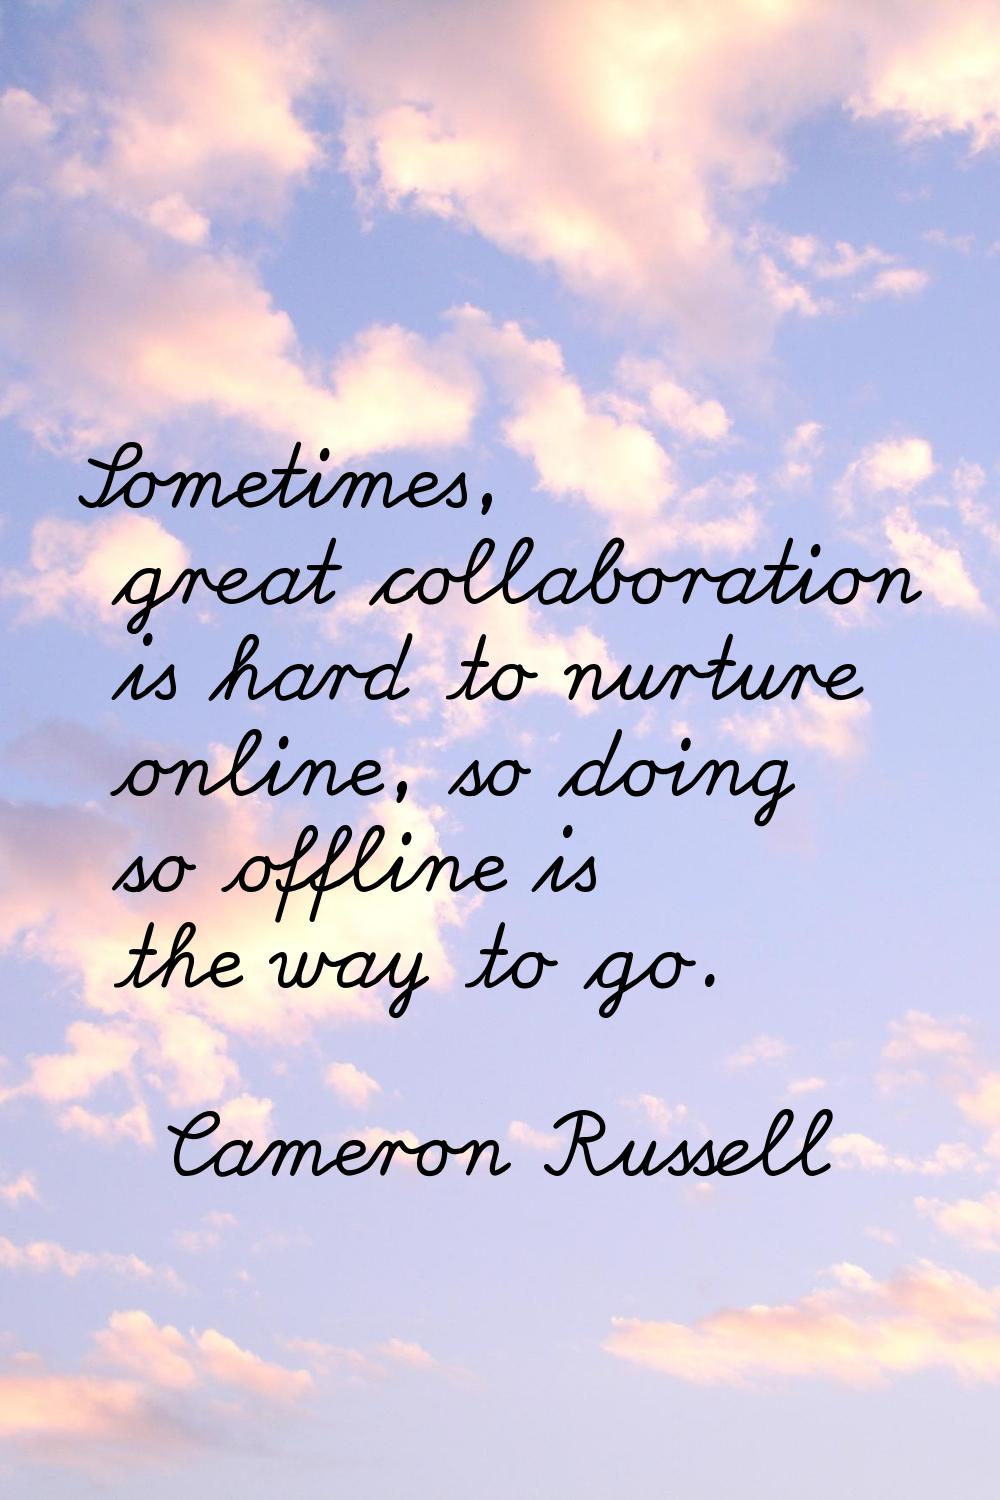 Sometimes, great collaboration is hard to nurture online, so doing so offline is the way to go.